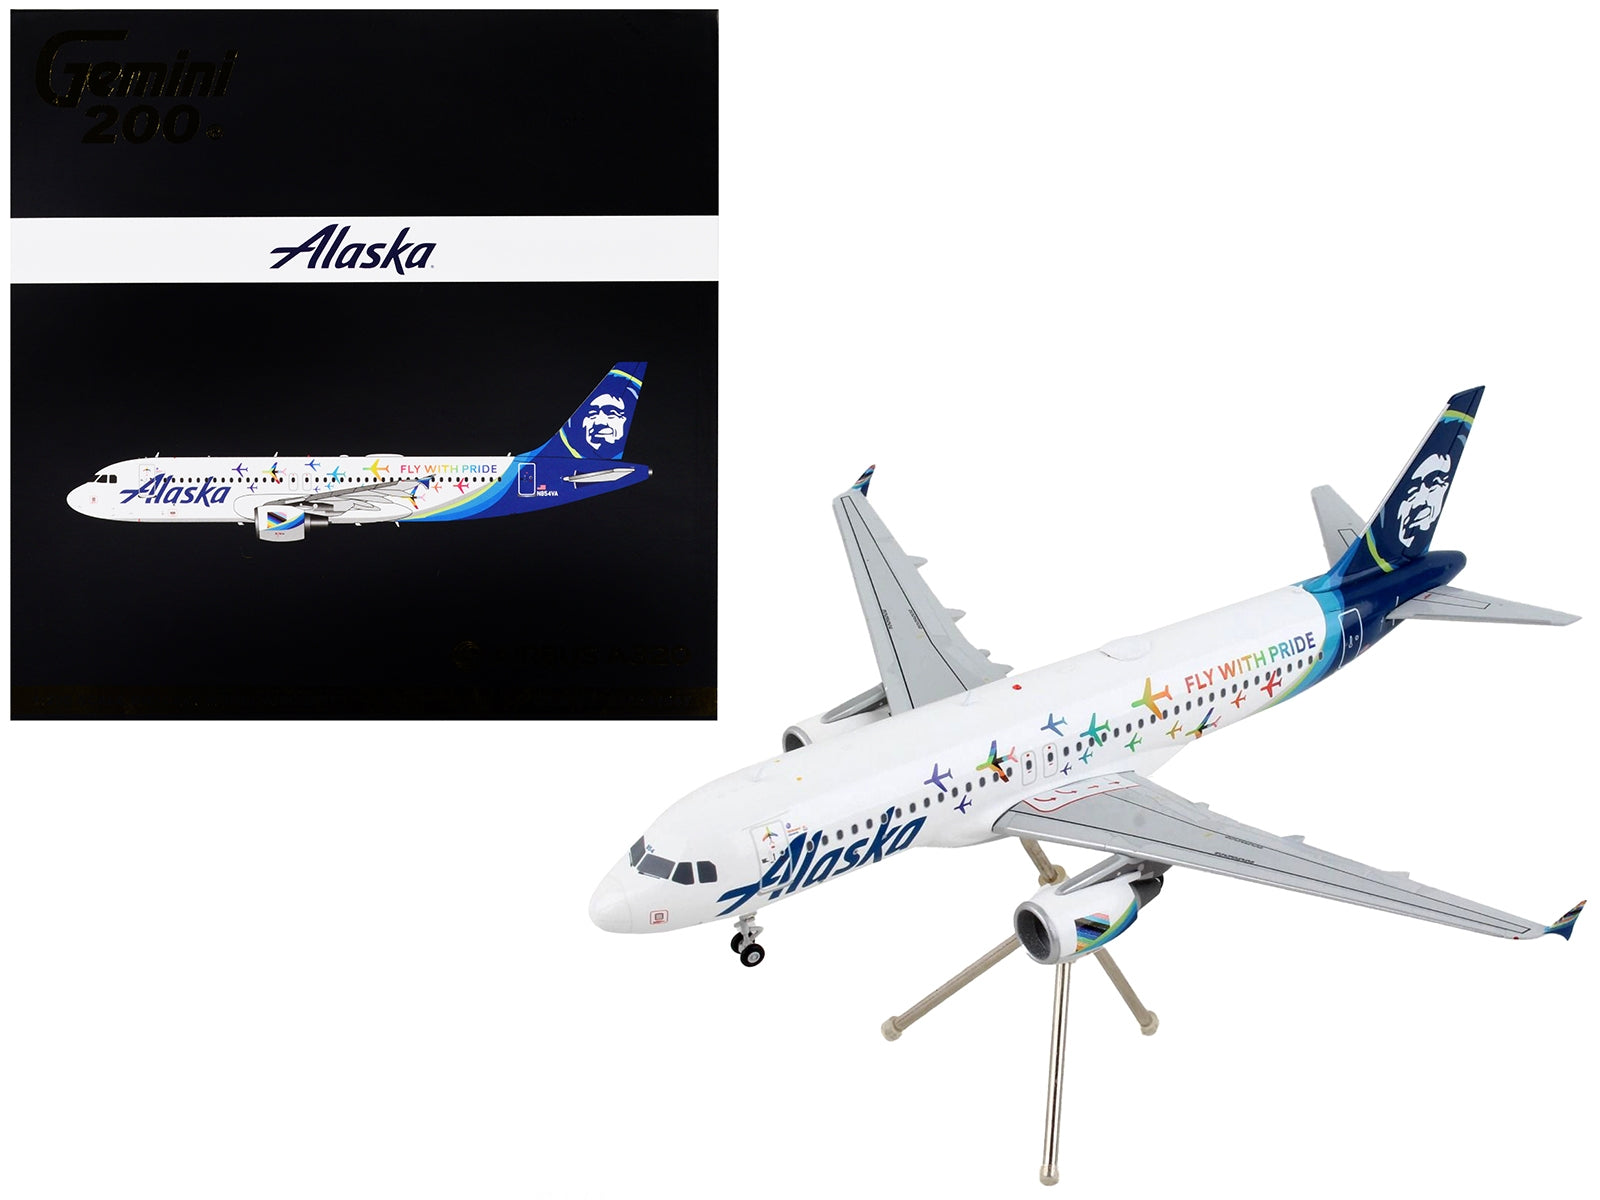 Airbus A320 Commercial Aircraft "Alaska Airlines - Fly With Pride" White with Blue Tail "Gemini 200" Series 1/200 Diecast Model Airplane by GeminiJets